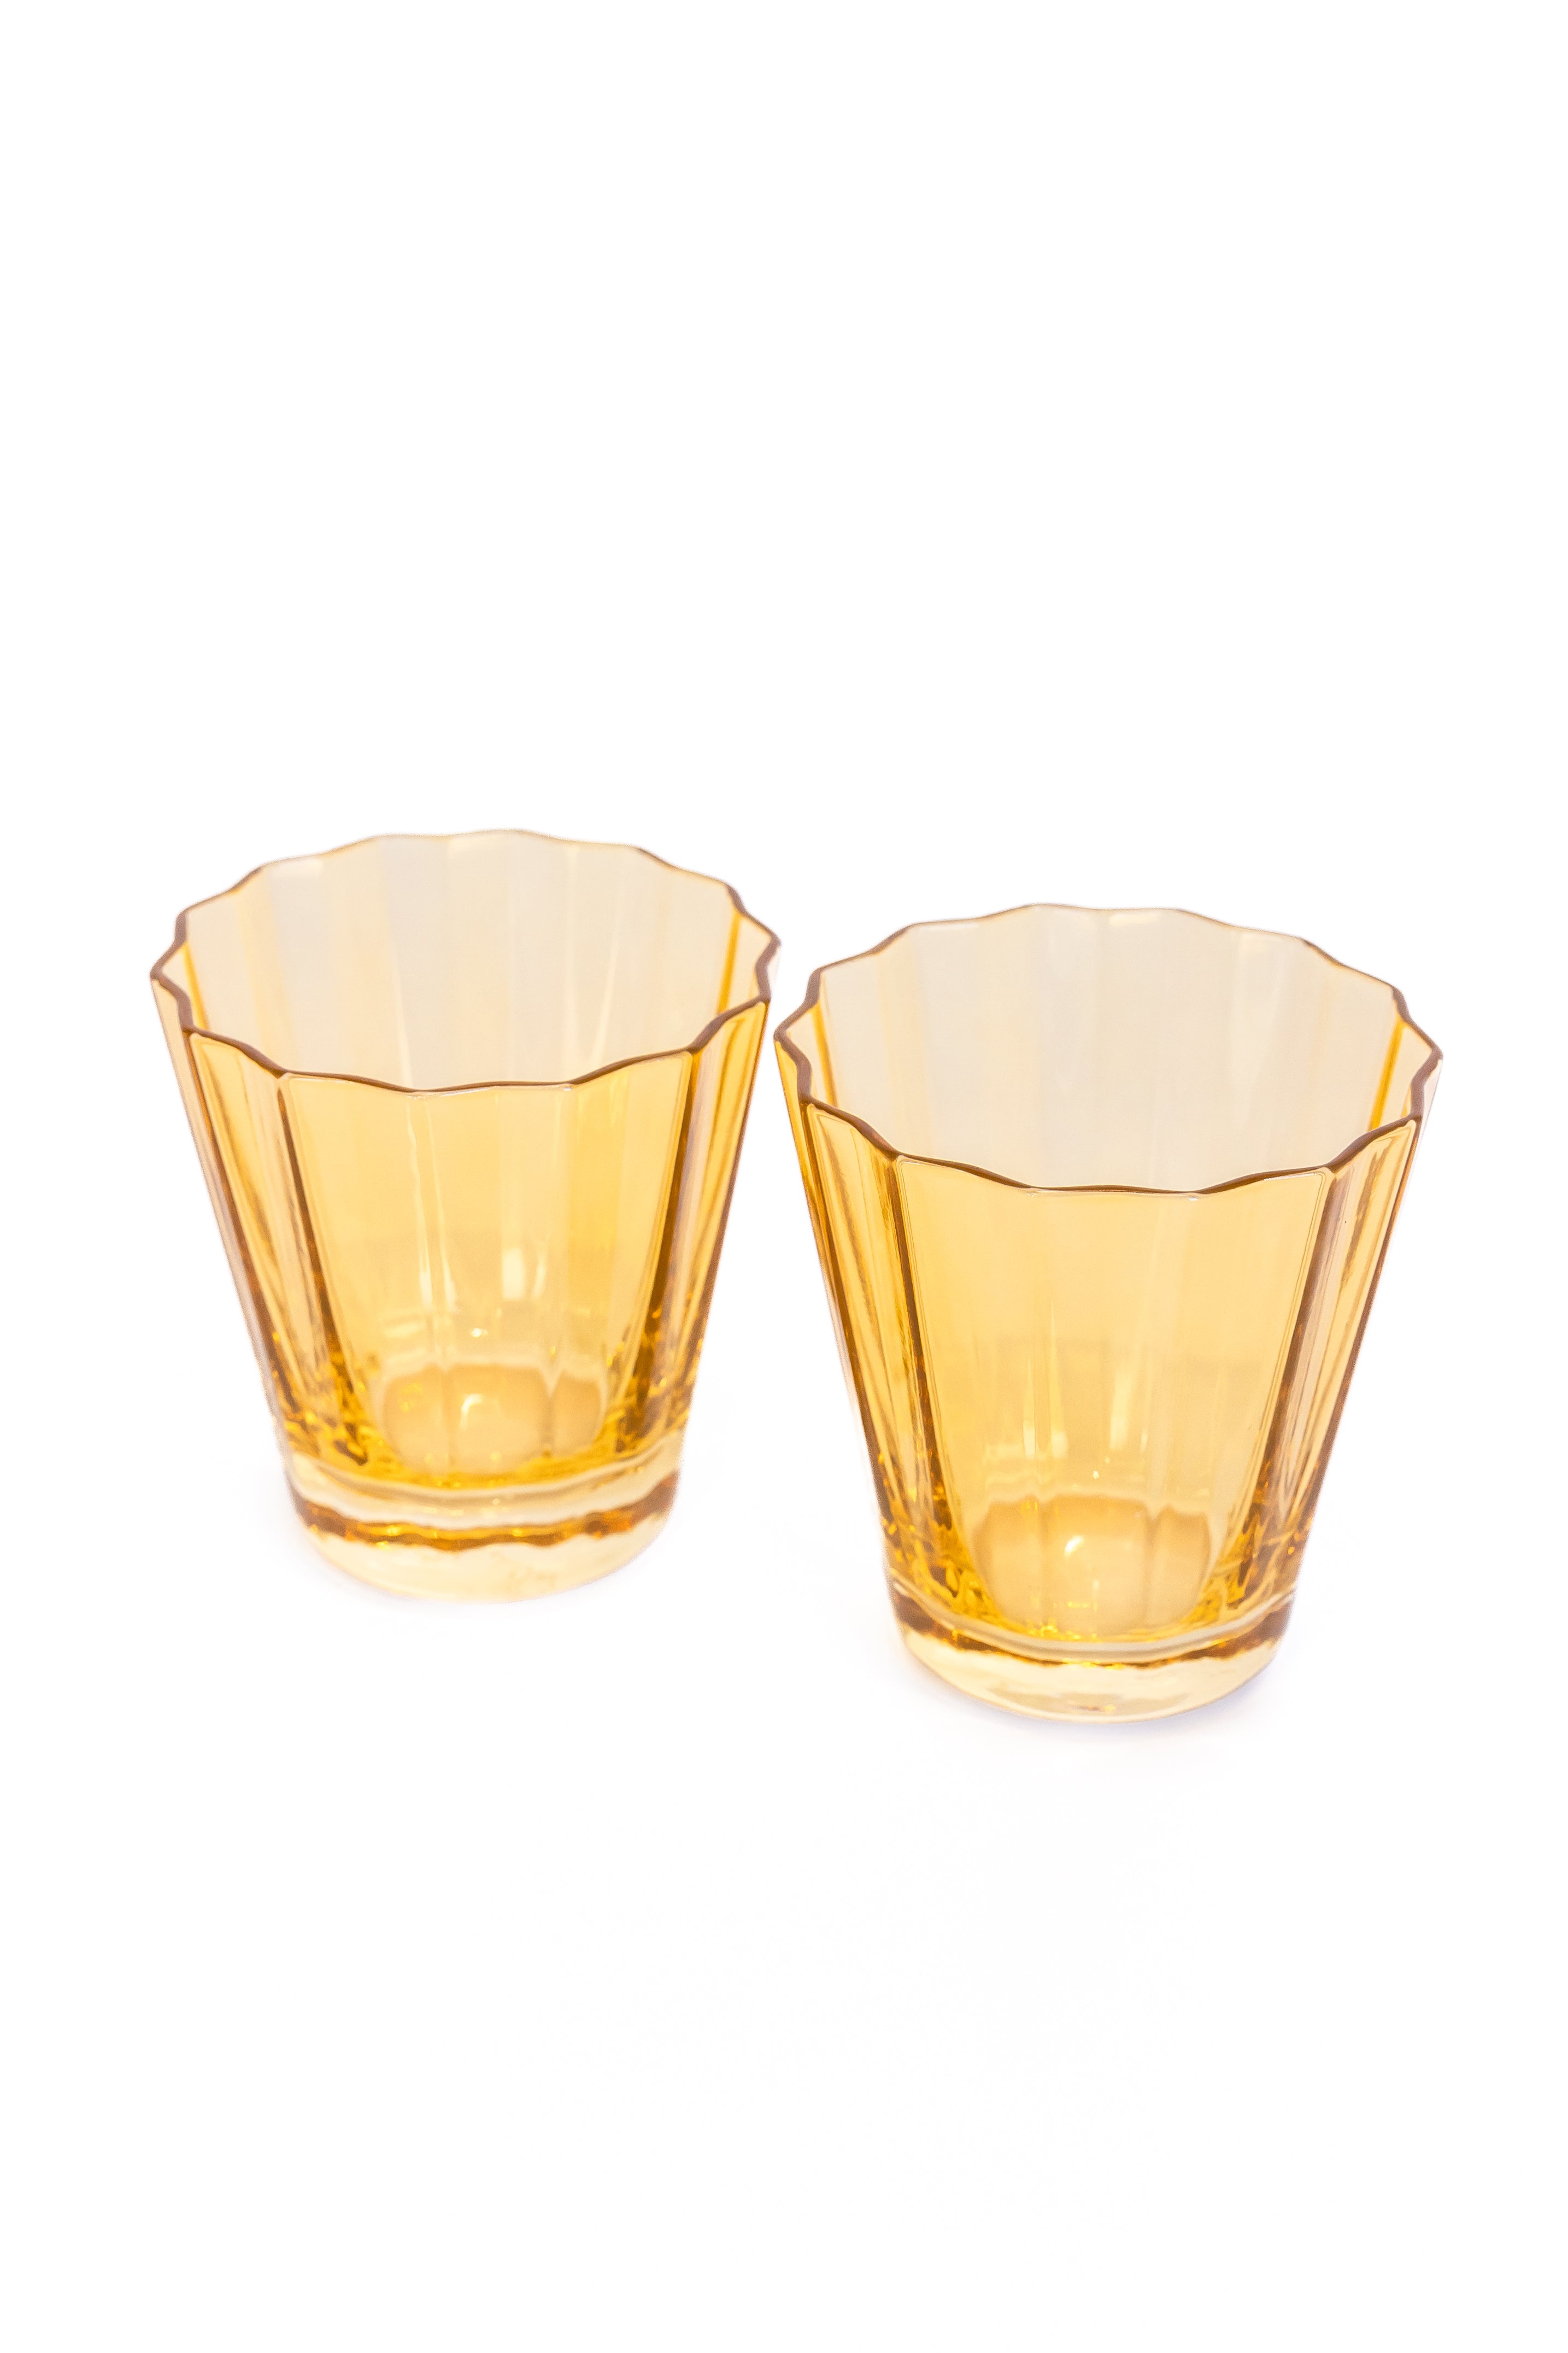 Estelle Colored Sunday Low Balls - Set of 2 {Yellow}